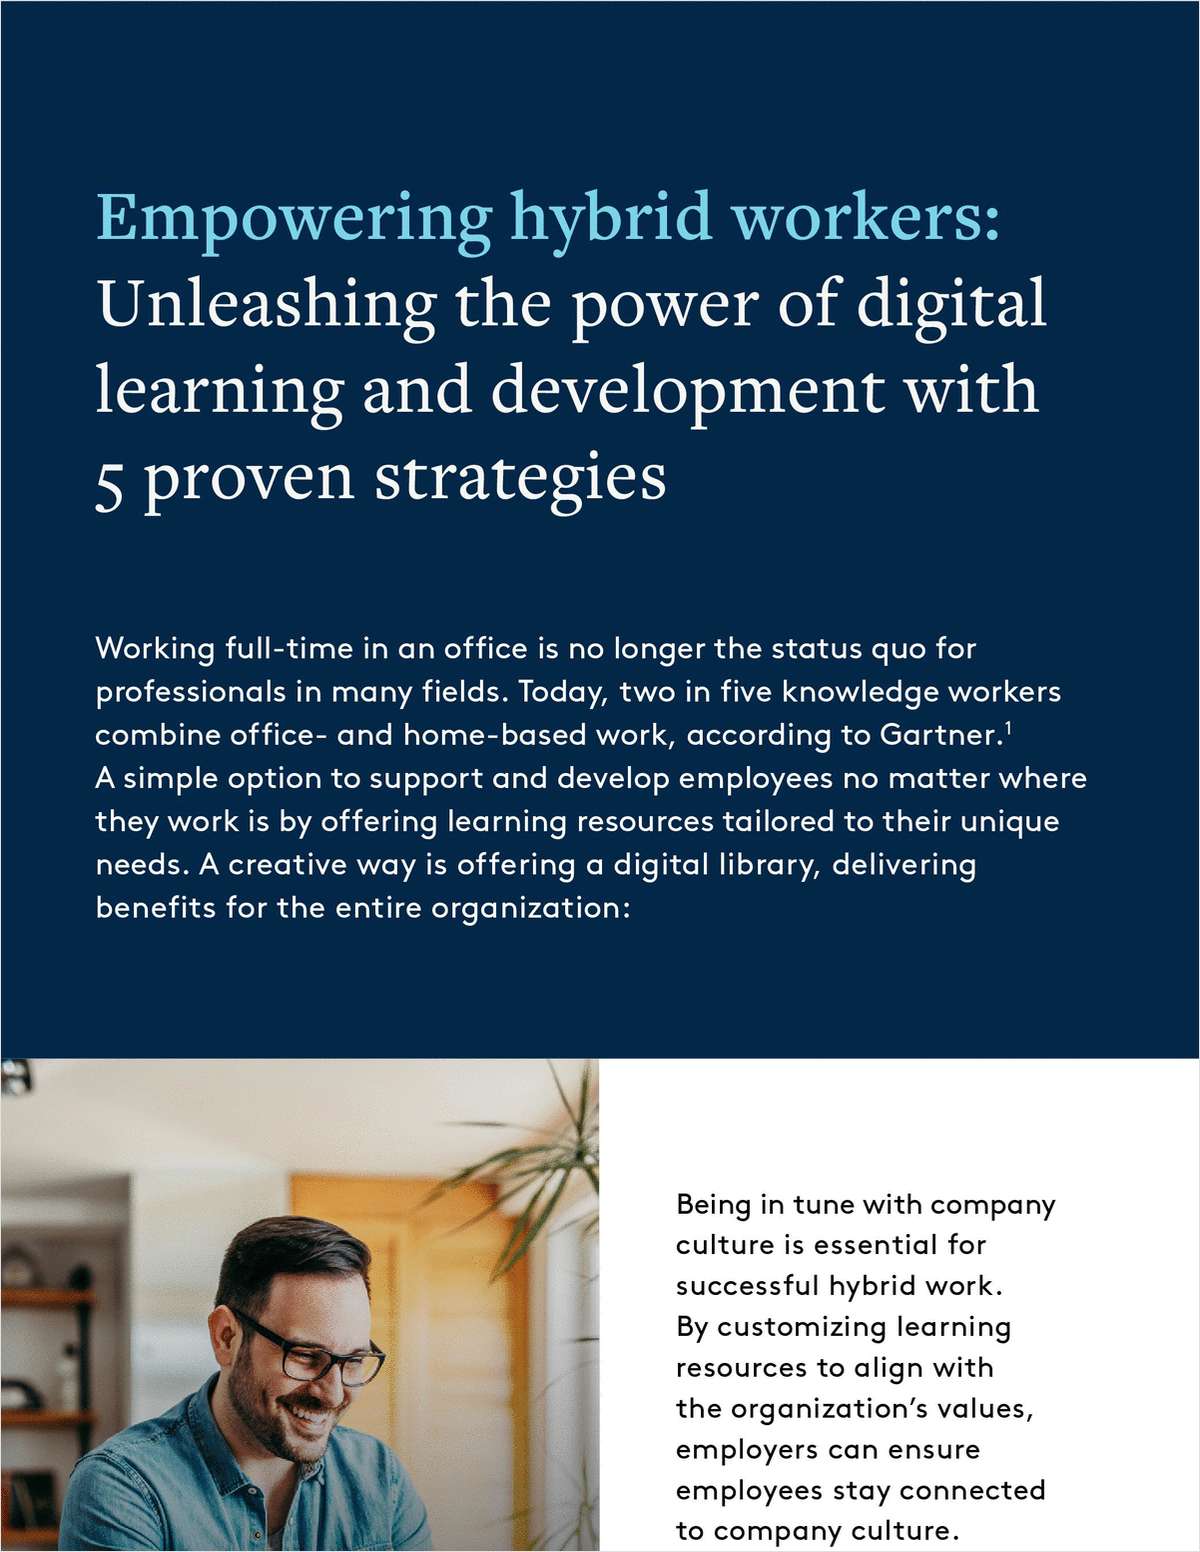 5 Ways to Support Hybrid Workers with Digital Learning